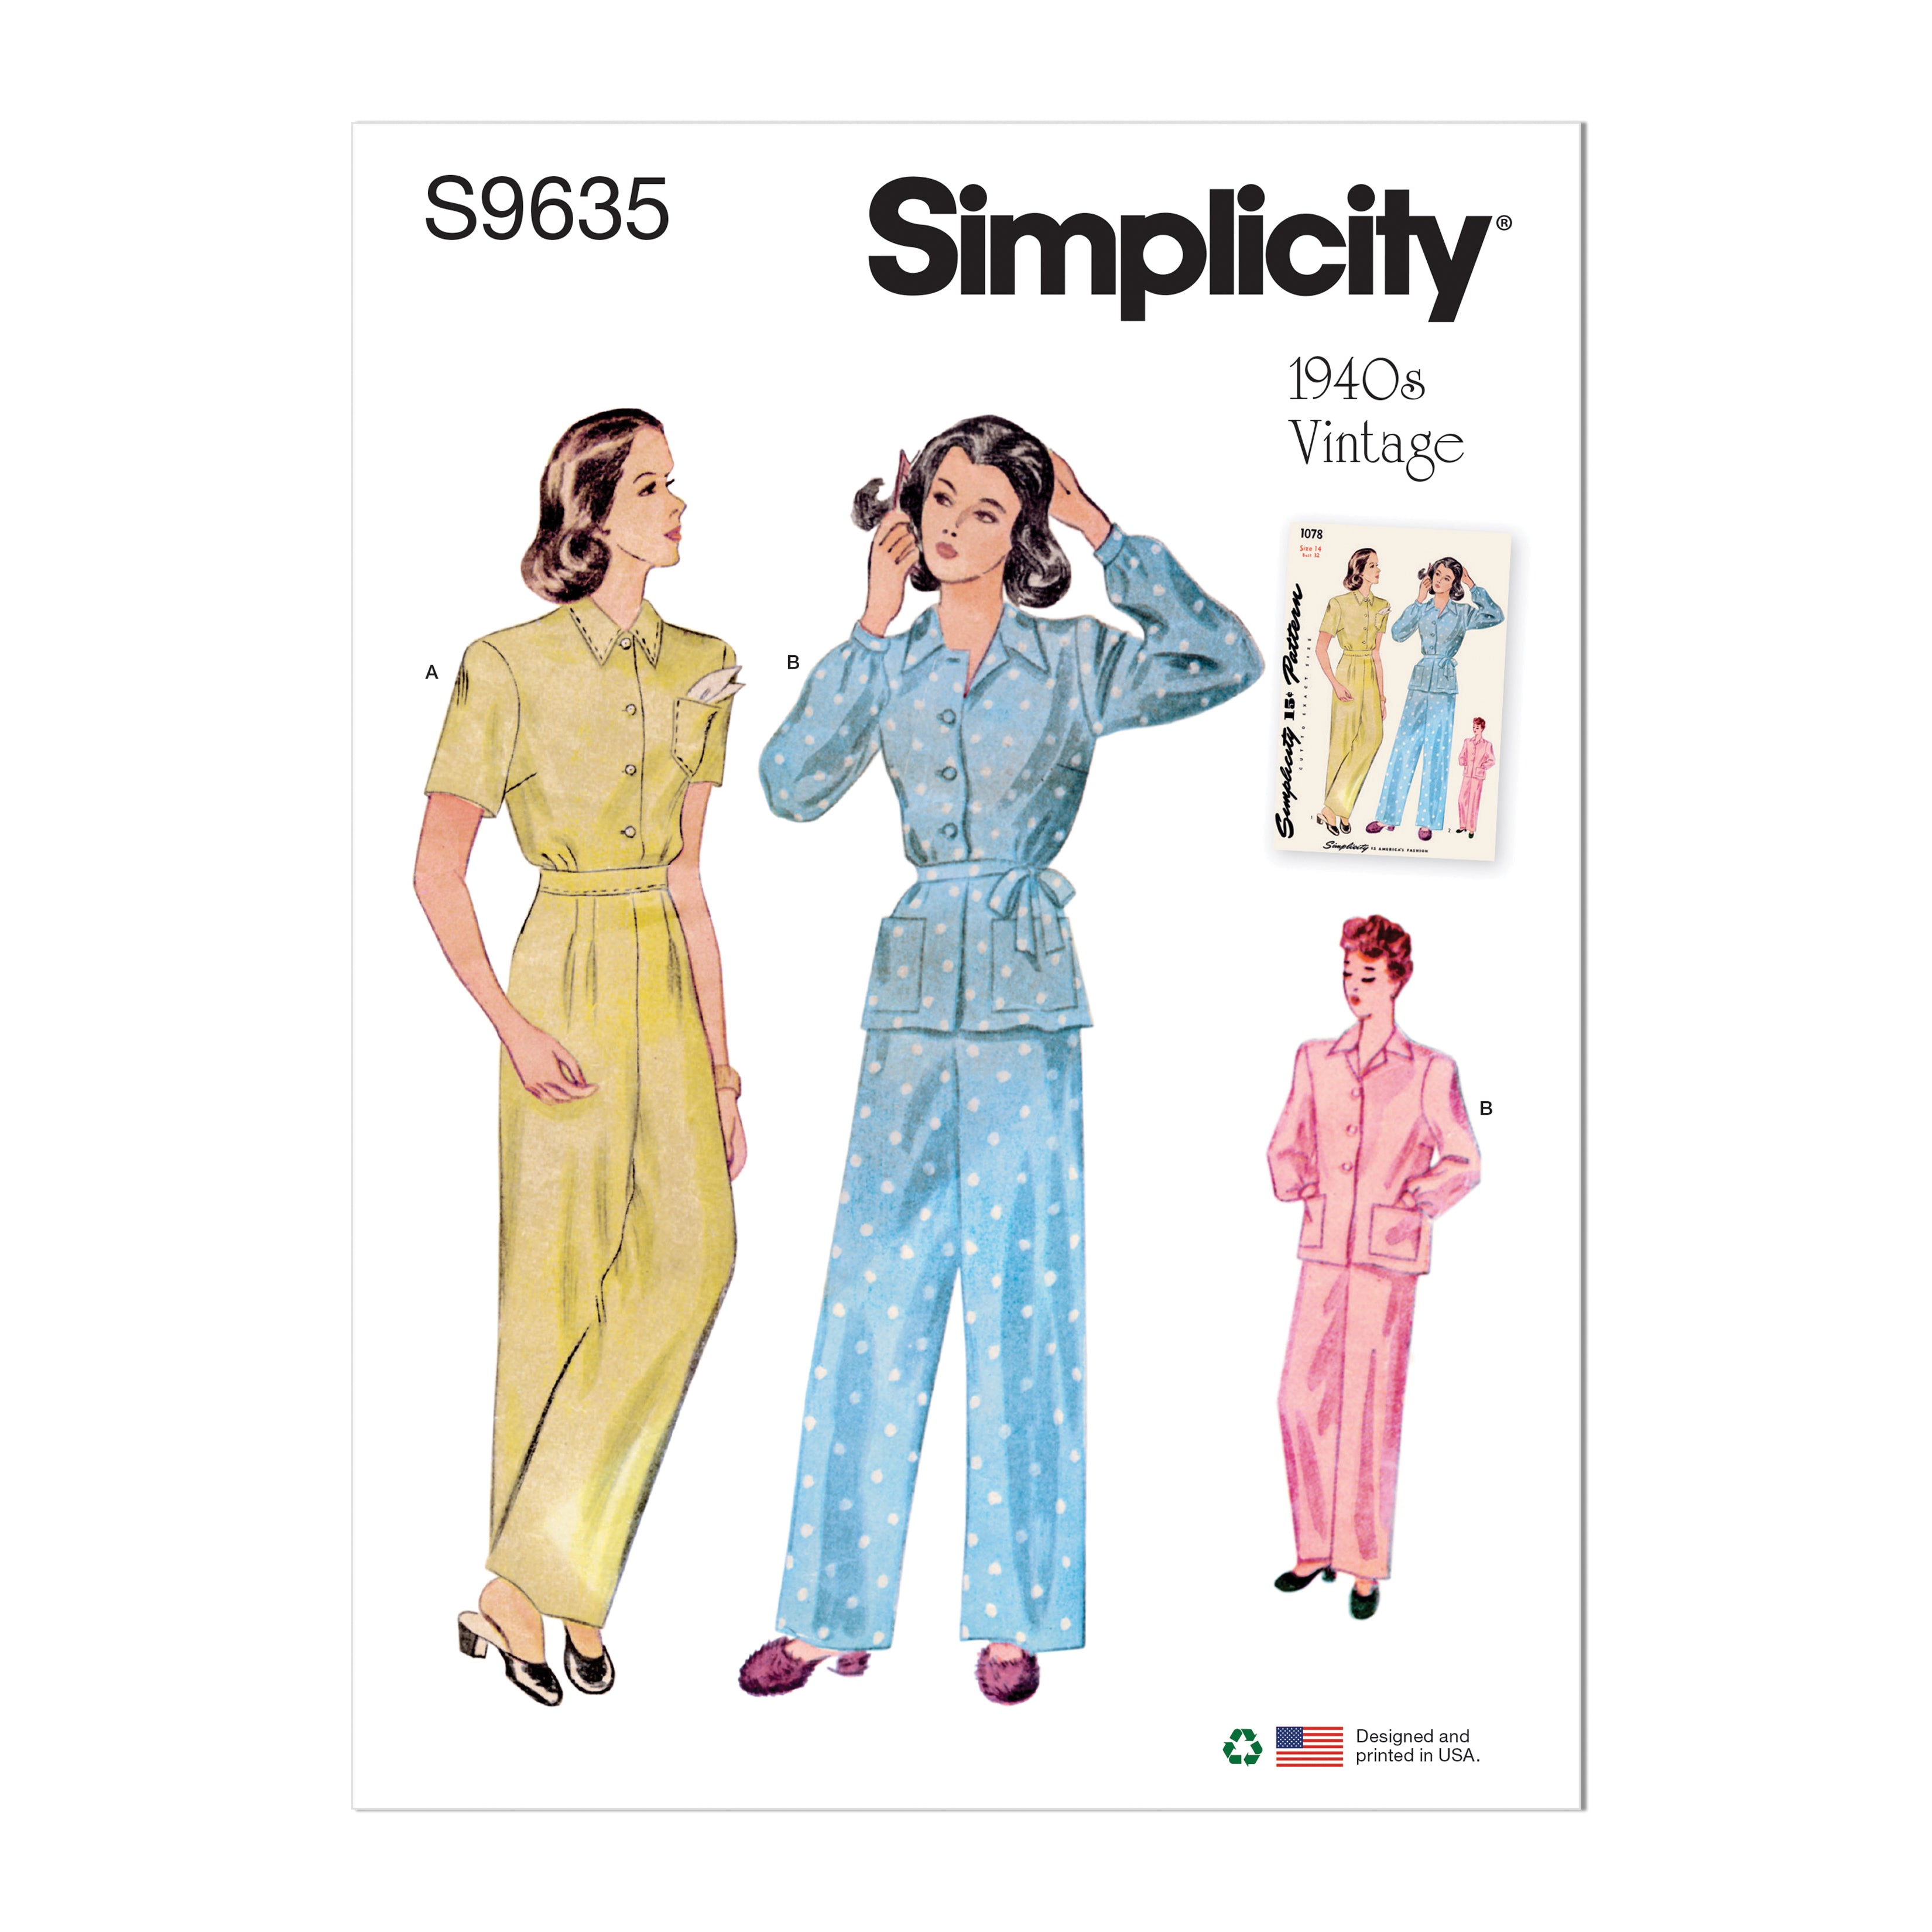 Simplicity sewing pattern 9635 Misses' Vintage Lounge Top and Pants from Jaycotts Sewing Supplies